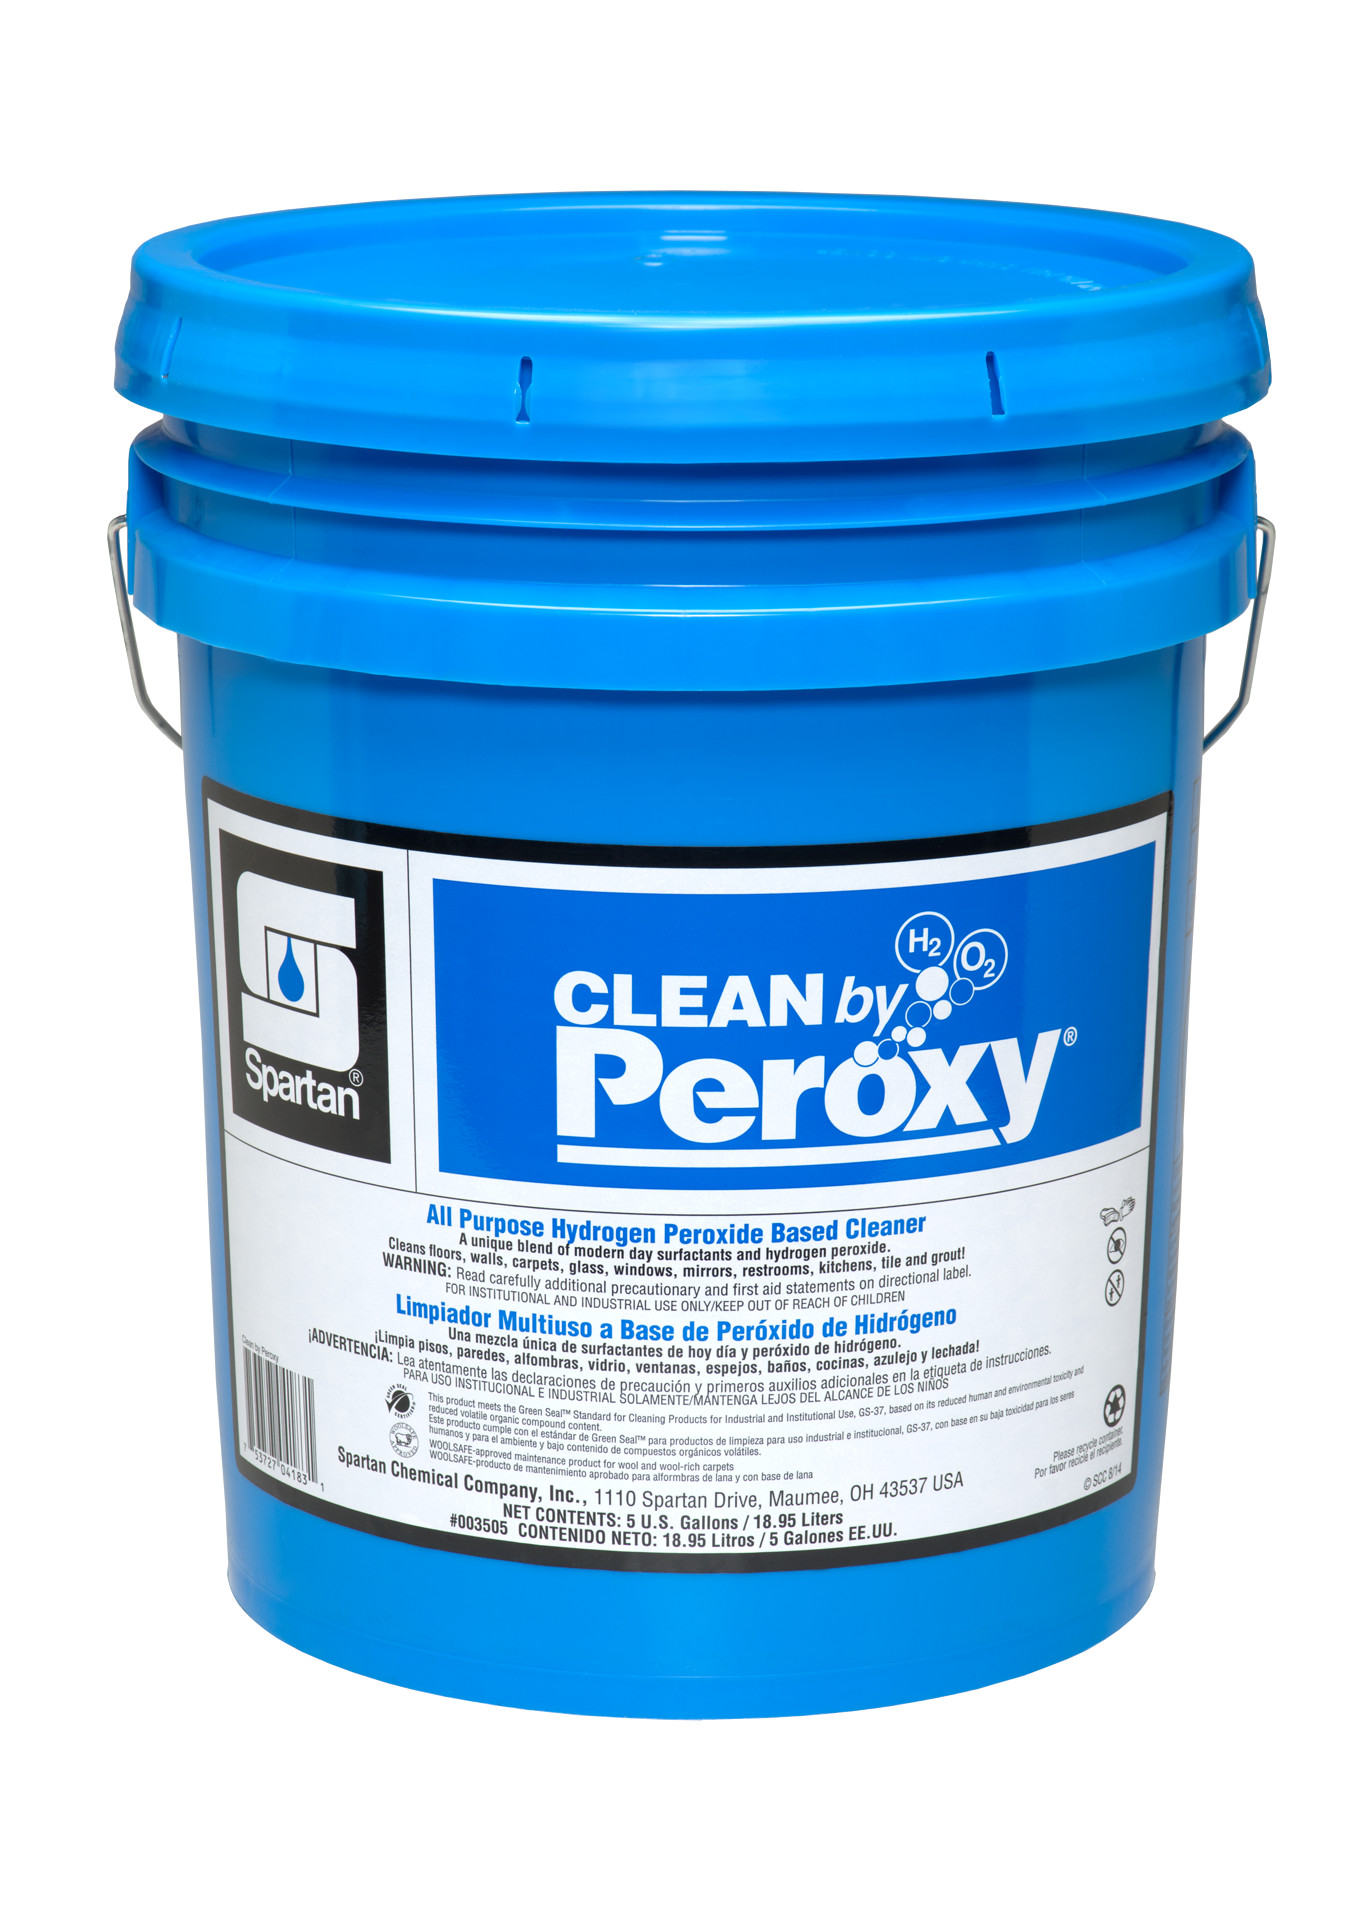 Spartan Chemical Company Clean by Peroxy, 5 GAL PAIL